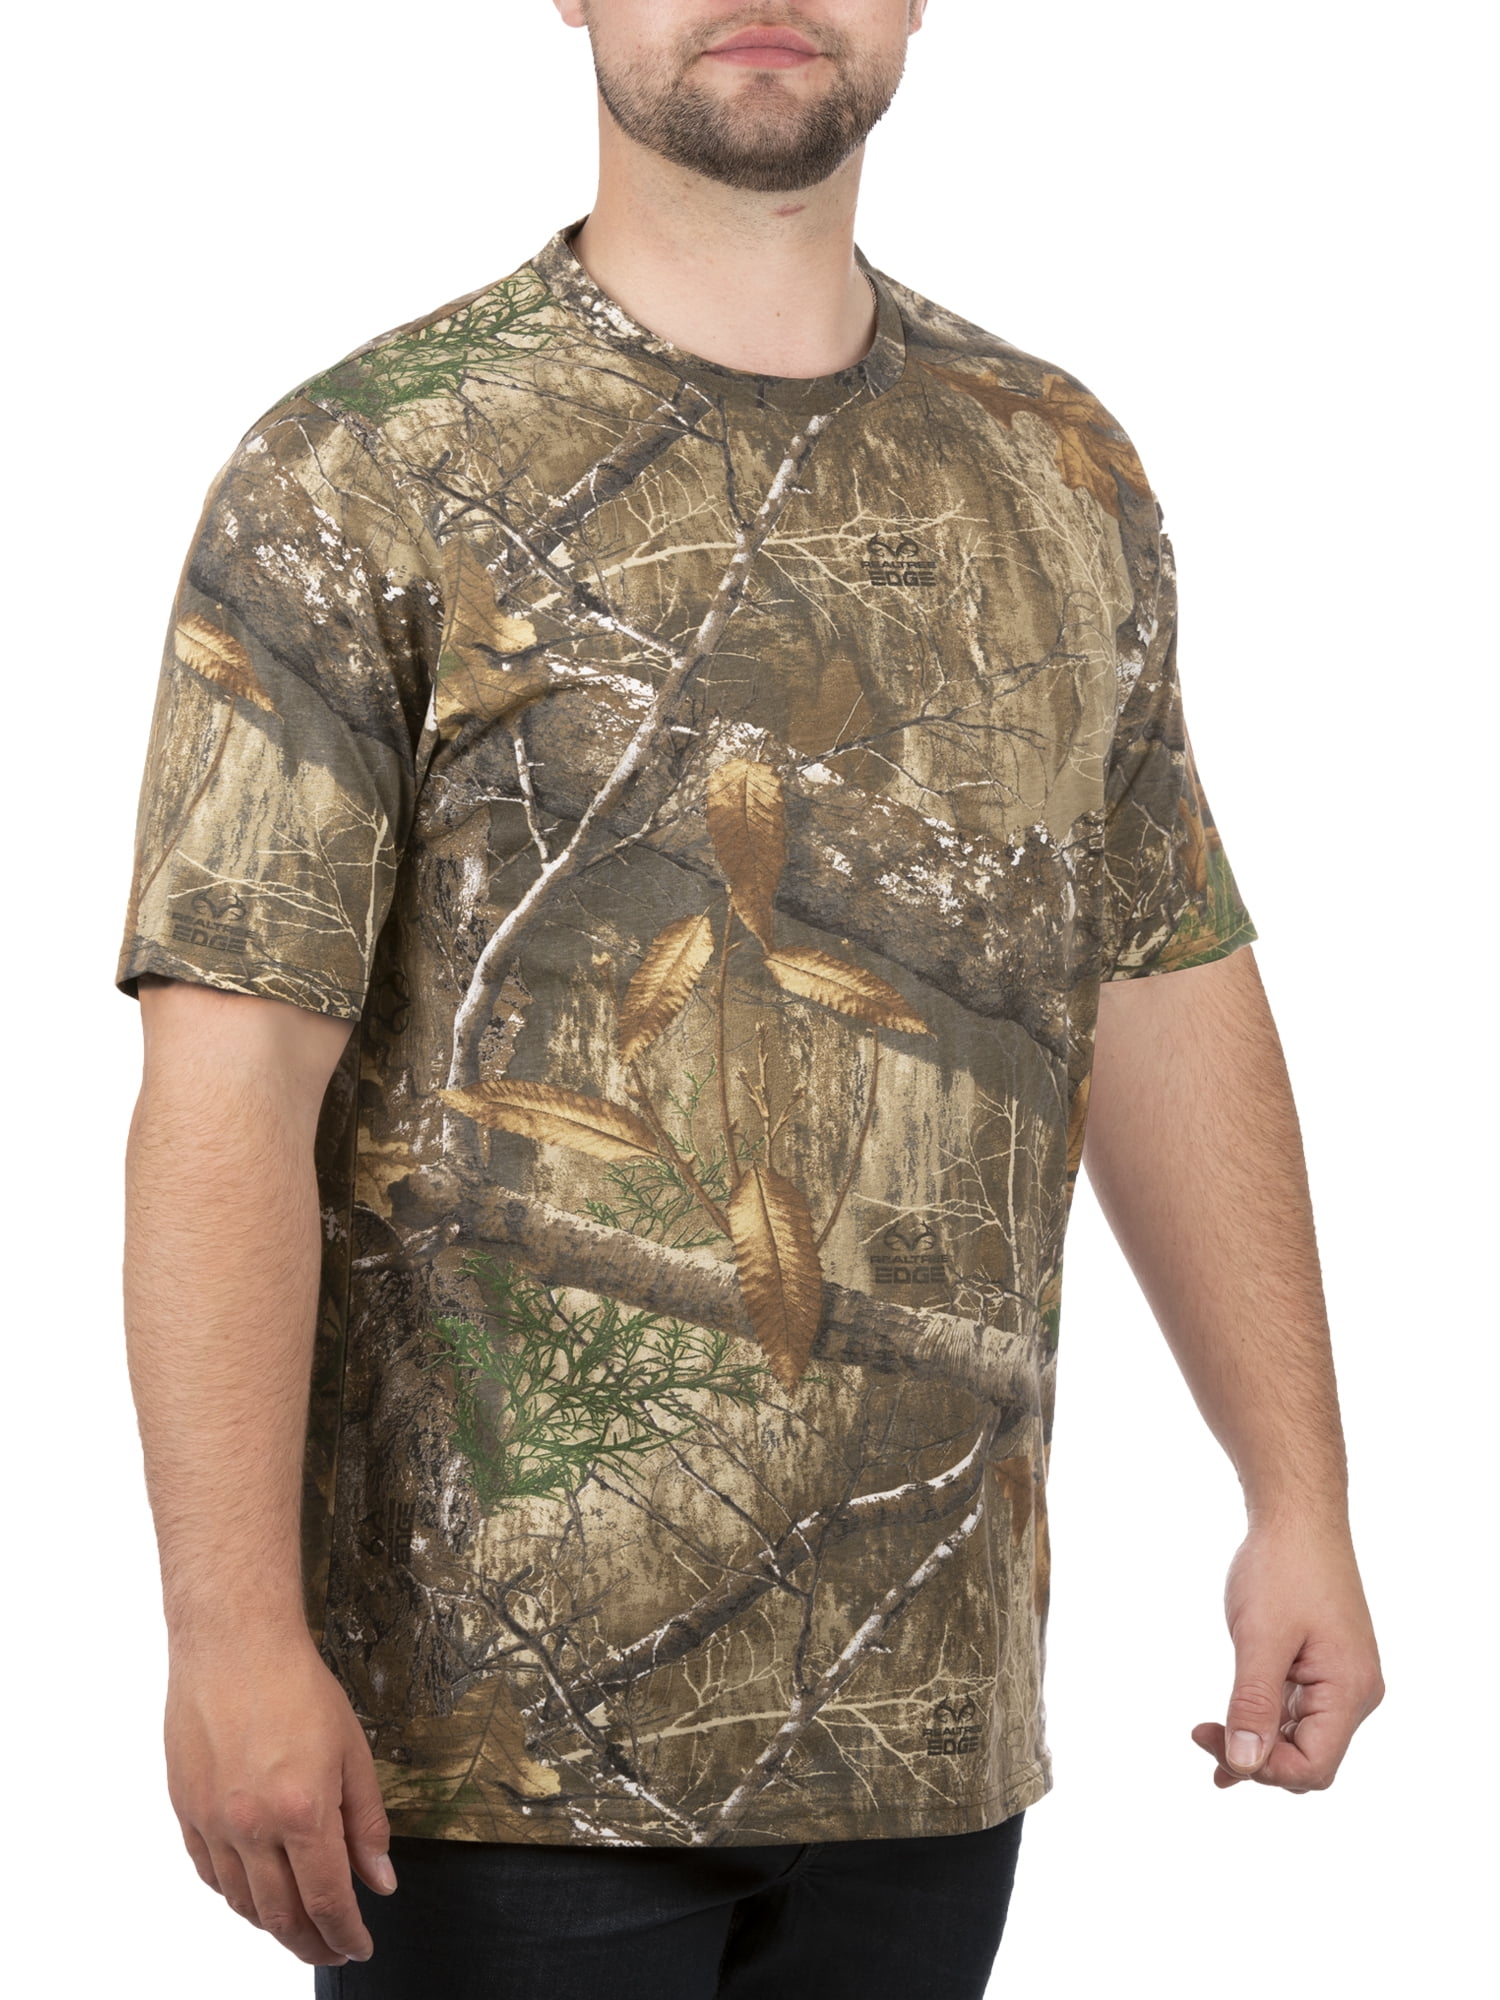 Under Armour UA Large New Early Season Kit Authentic Realtree Camo Mens Shirt 